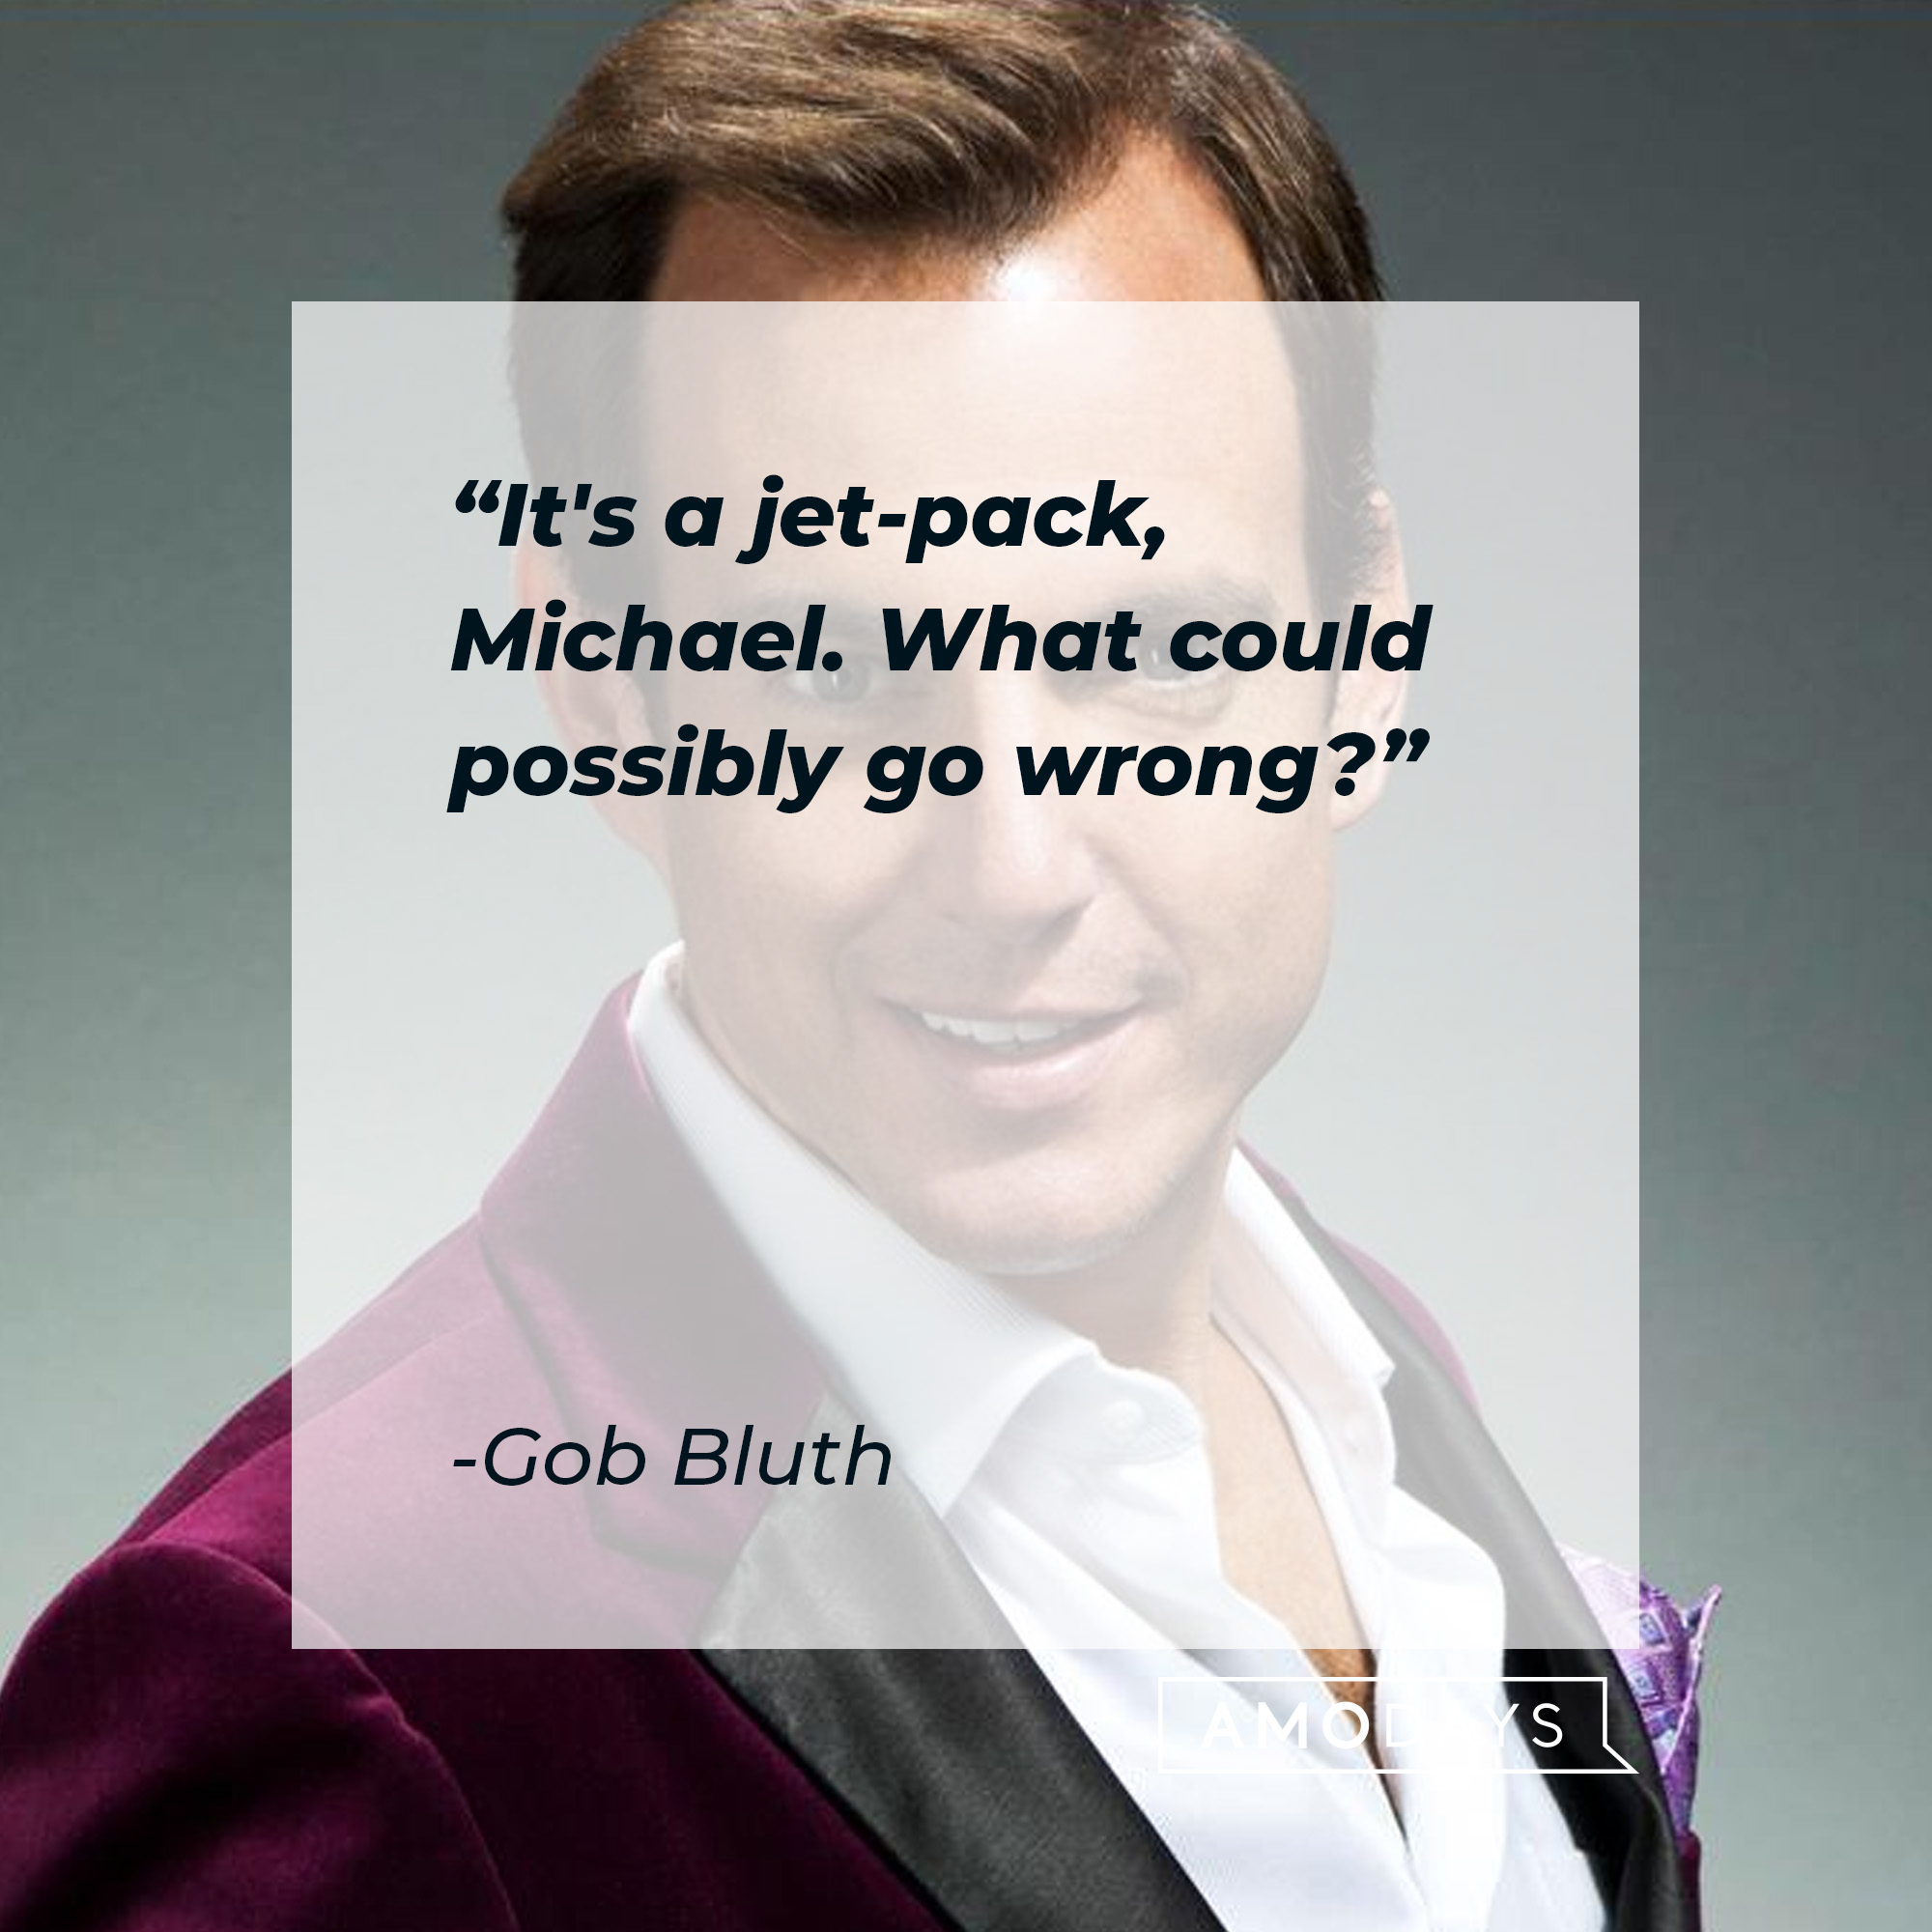 Gob Bluth's quote: "It's a jet-pack, Michael. What could possibly go wrong?" | Source: facebook.com/ArrestedDevelopment